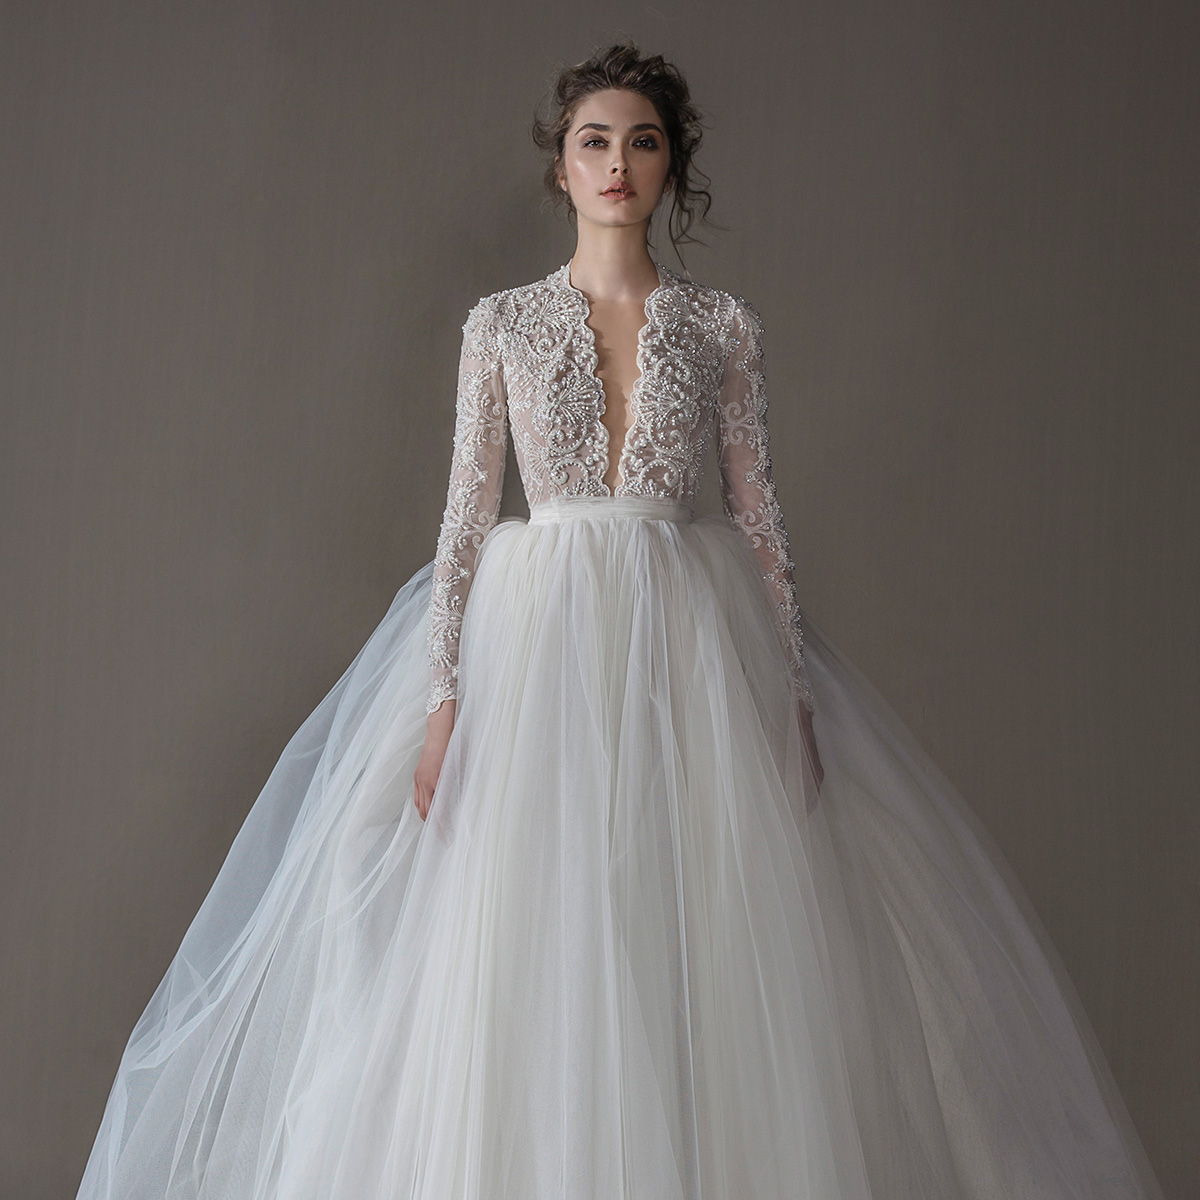 ersa atelier spring 2020 bridal wedding inspirasi featured wedding gowns dresses and collection